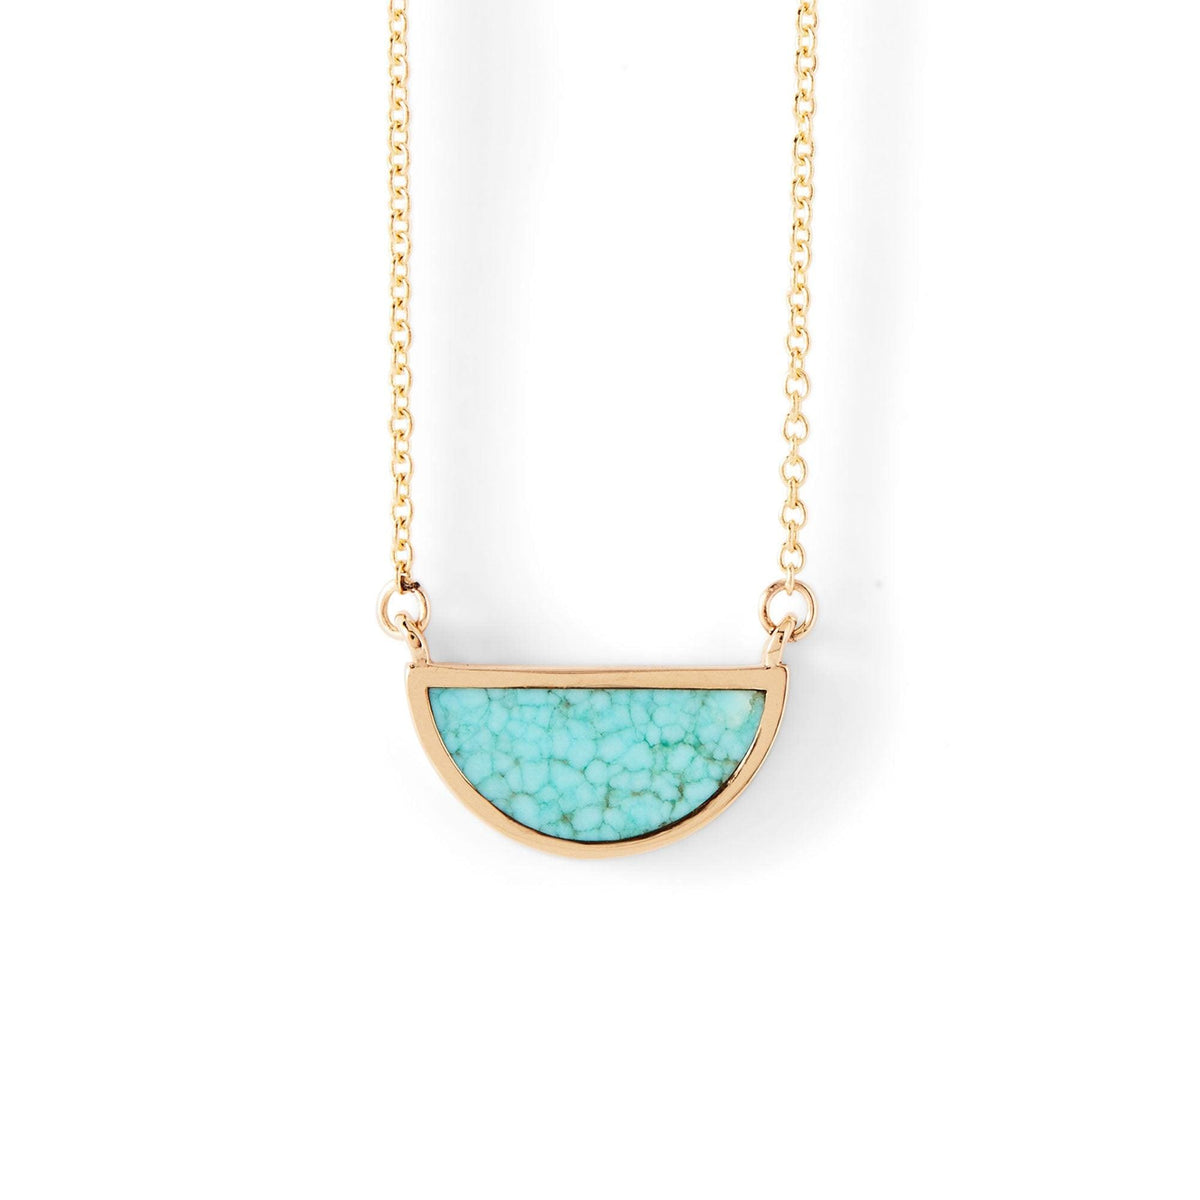 One Half Pendant / Number 8 Turquoise - 14K YELLOW GOLD ring